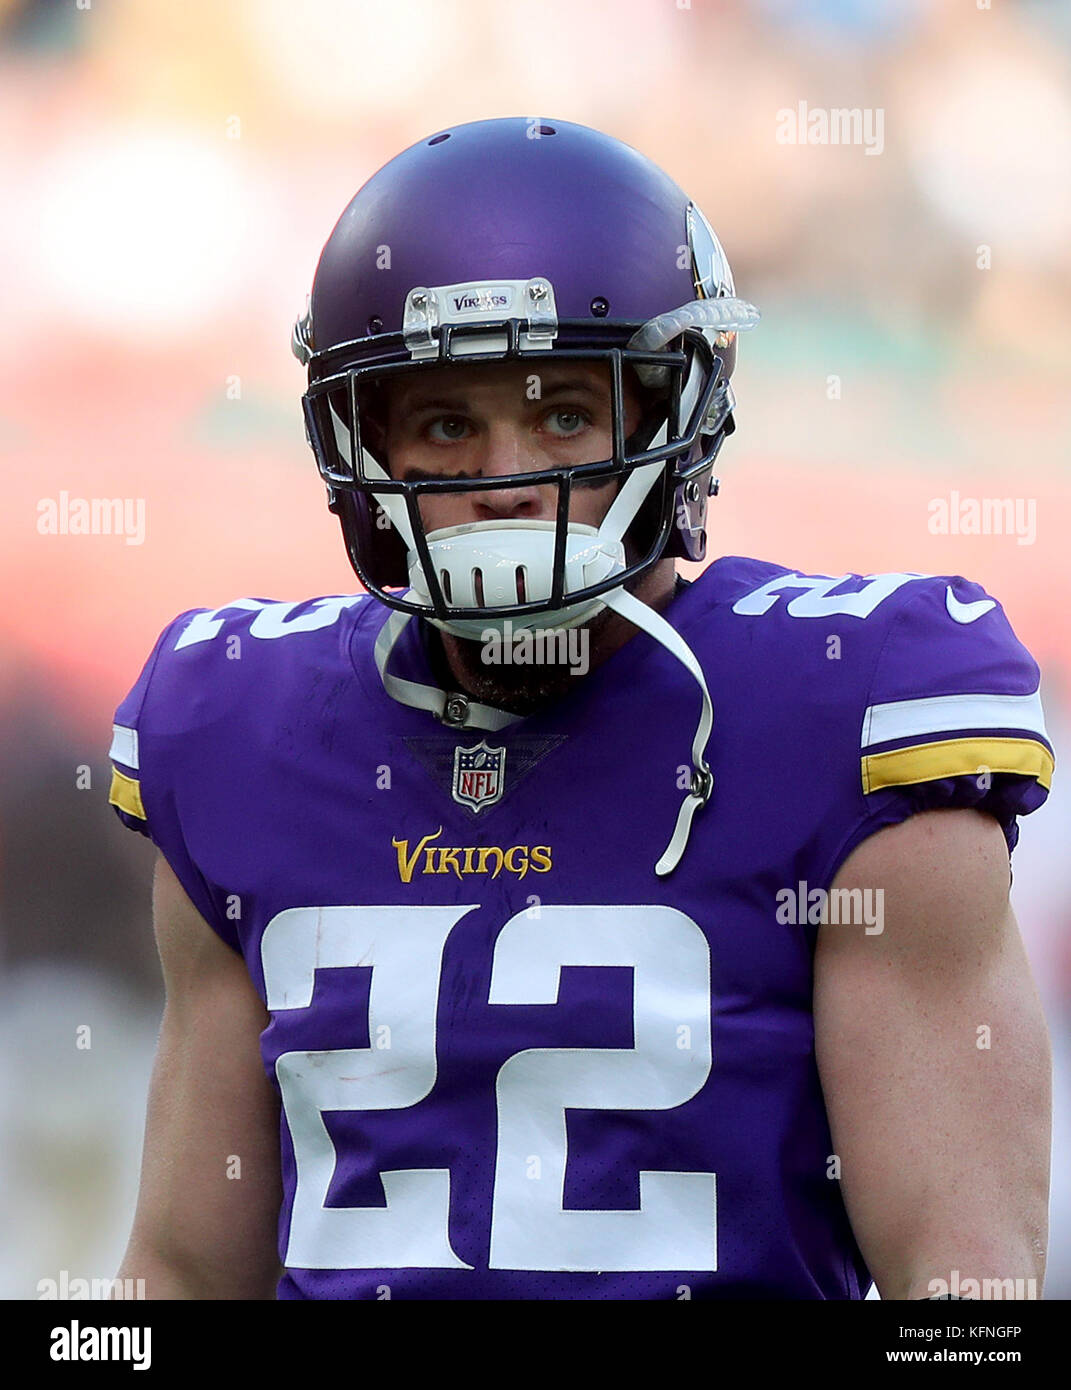 Minnesota Vikings' Harrison Smith during warm-up before during the  International Series NFL match at Twickenham, London. PRESS ASSOCIATION  Photo. Picture date: Sunday October 29, 2017. See PA story GRIDIRON London.  Photo credit